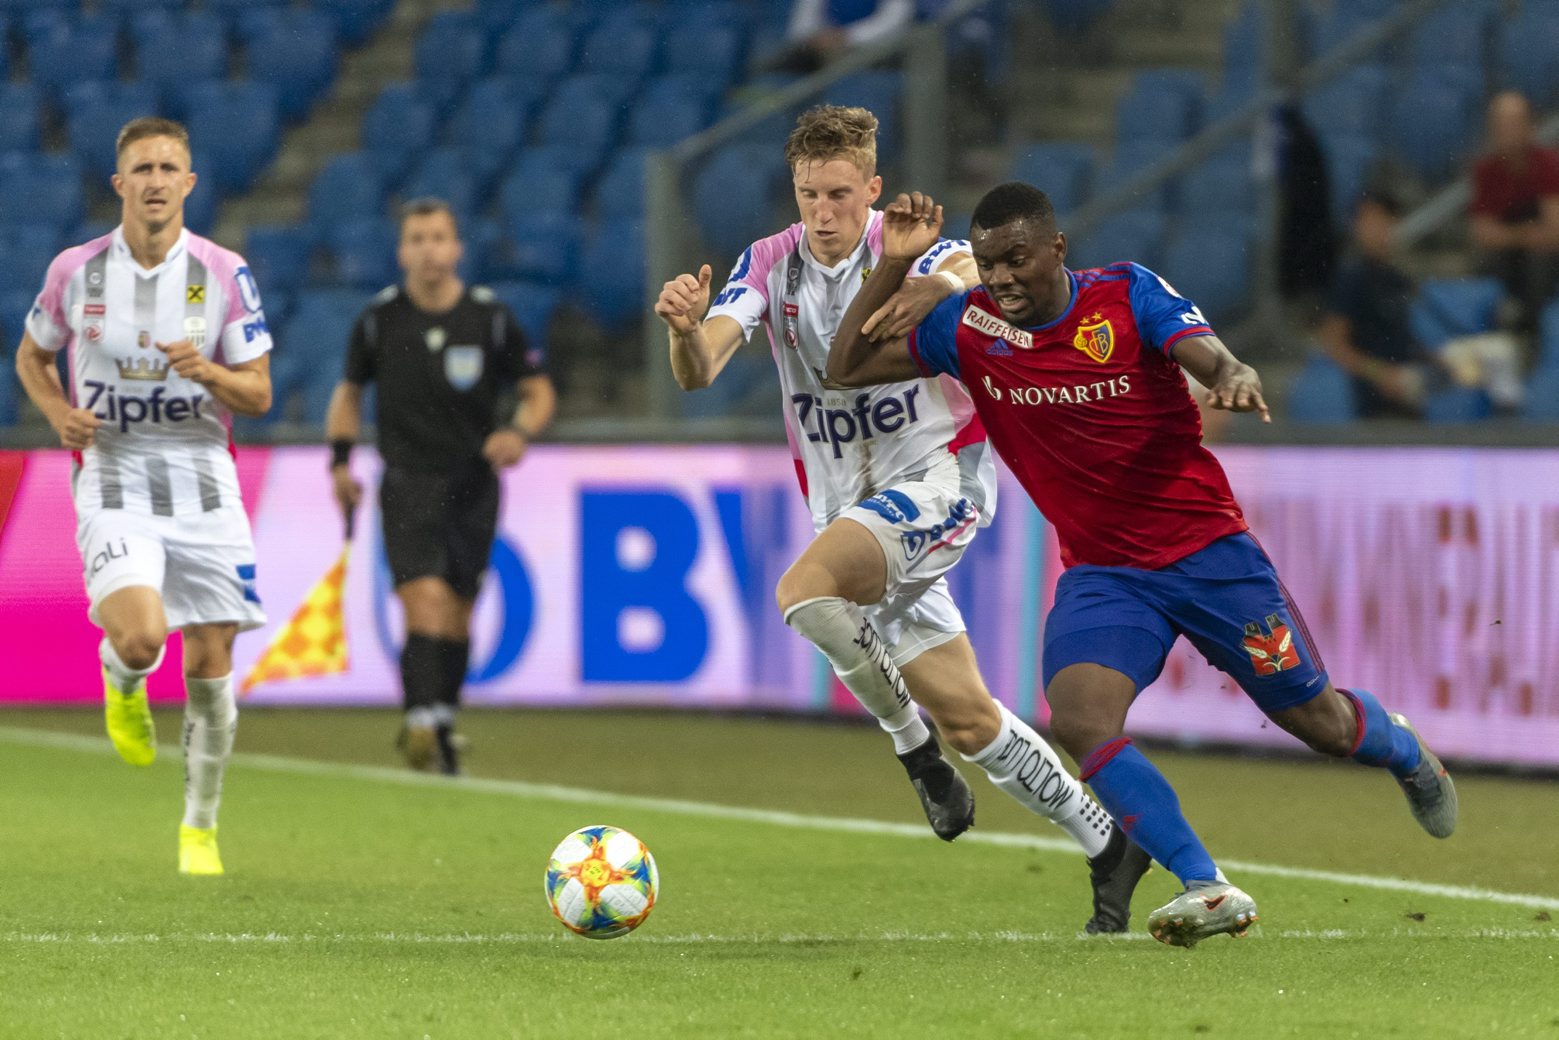 LASK's Philipp Wiesinger, left, fights for the ball against Basel's Afimico Pululu, right, during the UEFA Champions League third qualifying round first leg match between Switzerland's FC Basel 1893 and Austria's LASK in the St. Jakob-Park stadium in Basel, Switzerland, on Wednesday, August 7, 2019. (KEYSTONE/Georgios Kefalas) SWITZERLAND SOCCER CHAMPIONS LEAGUE QUALIFIER BASEL LASK